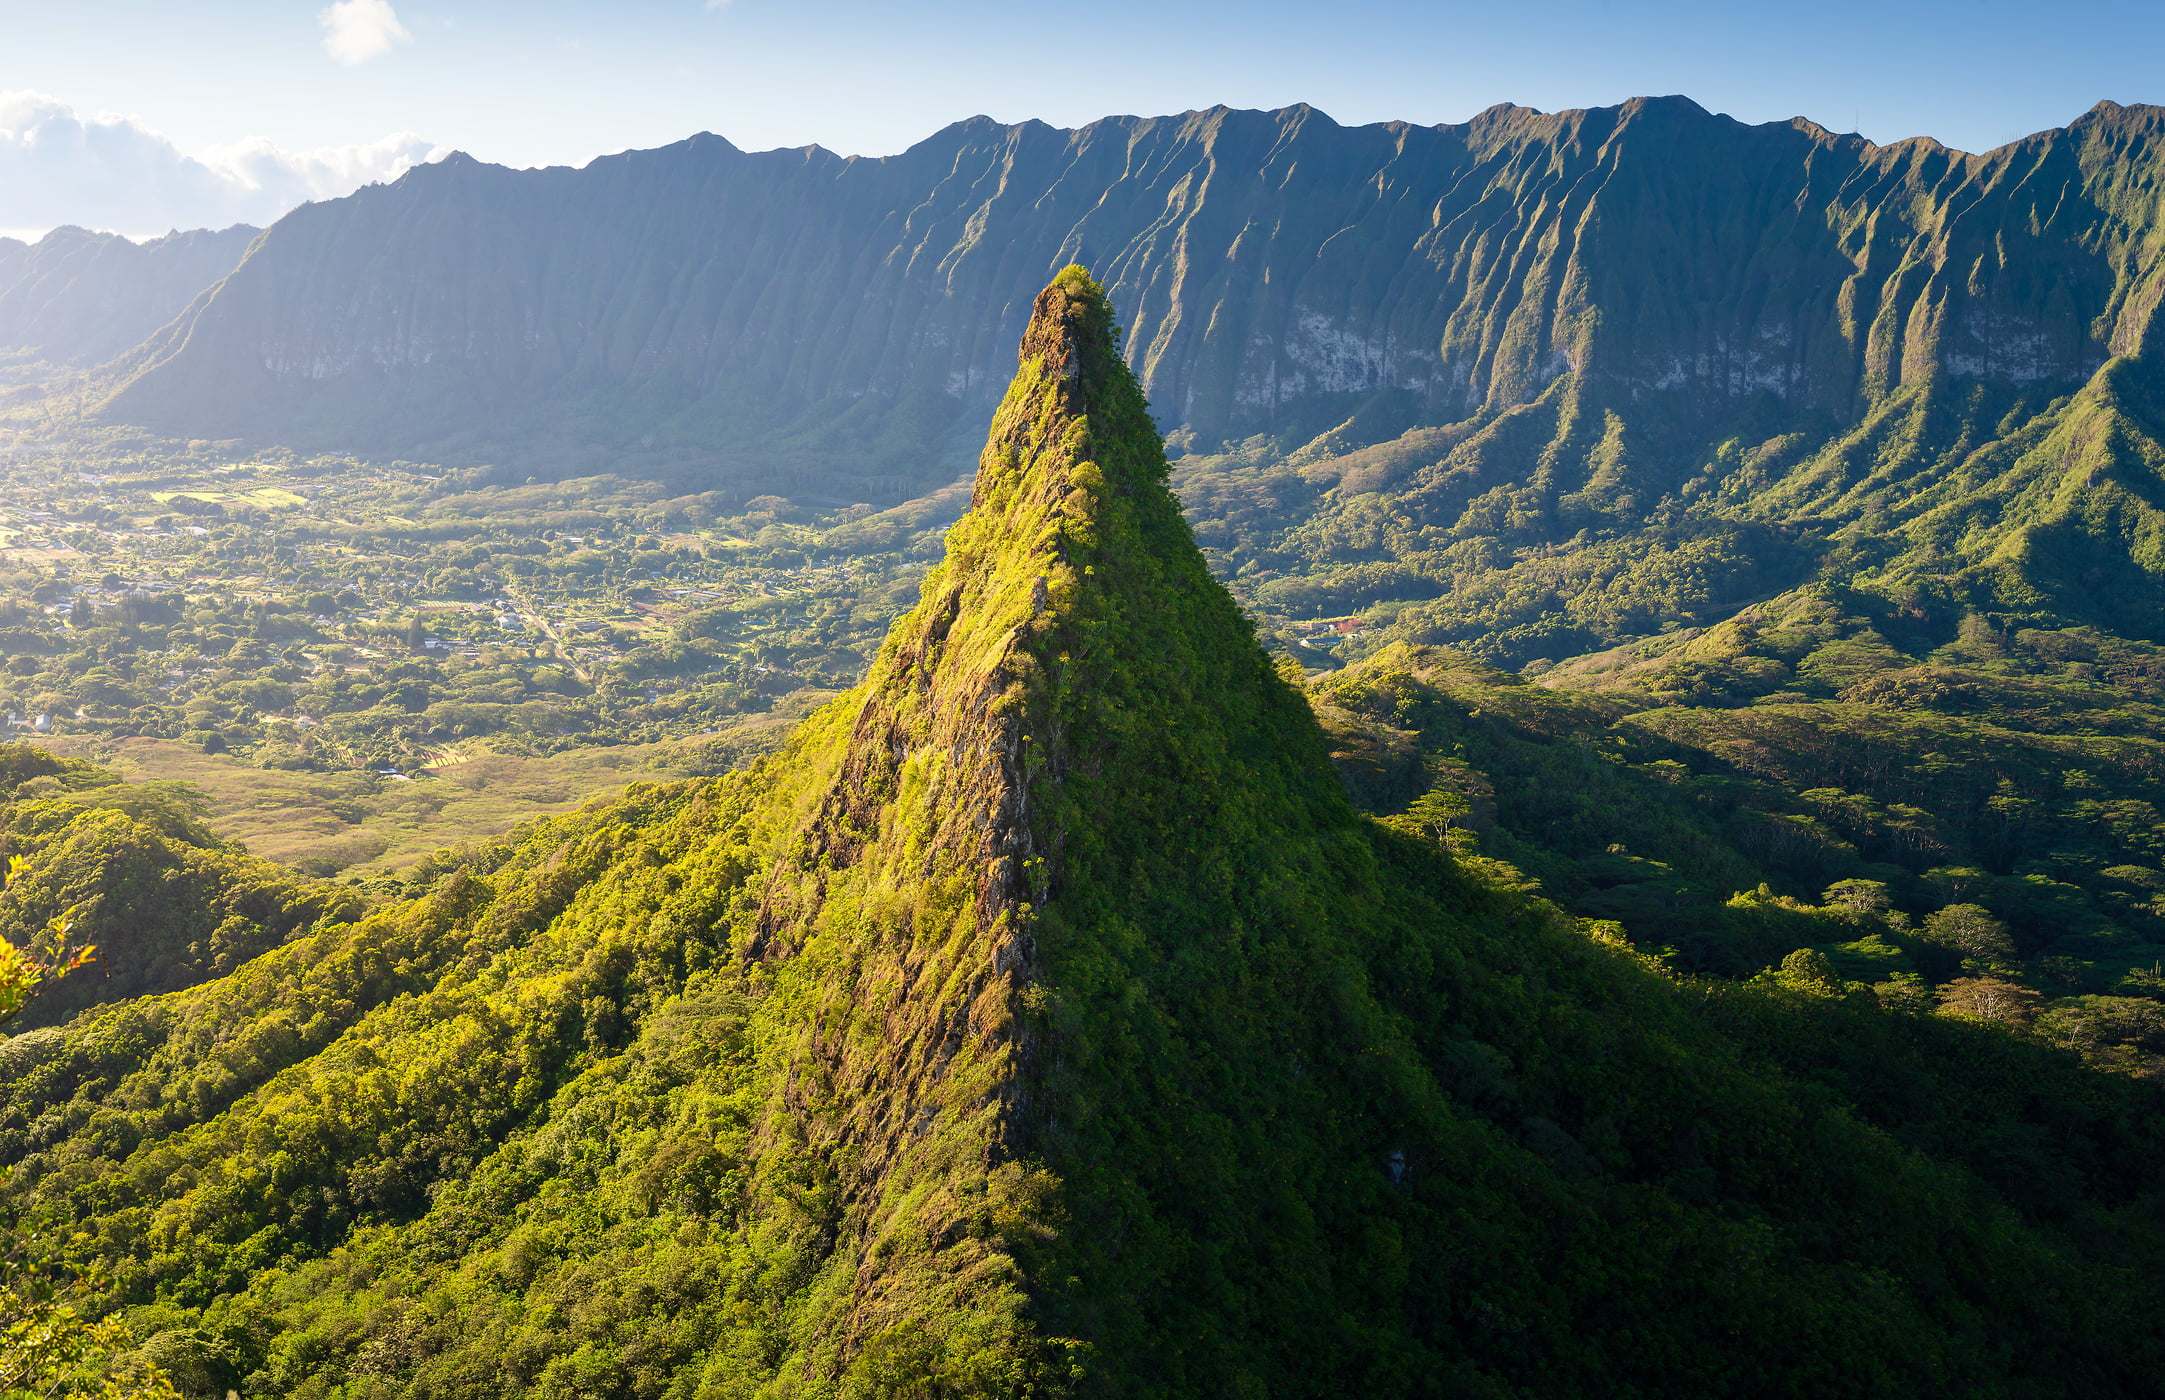 296 megapixels! A very high resolution, large-format VAST photo print of a Hawaii landscape; art photograph created by Jeff Lewis in Kaneohe, Hawaii